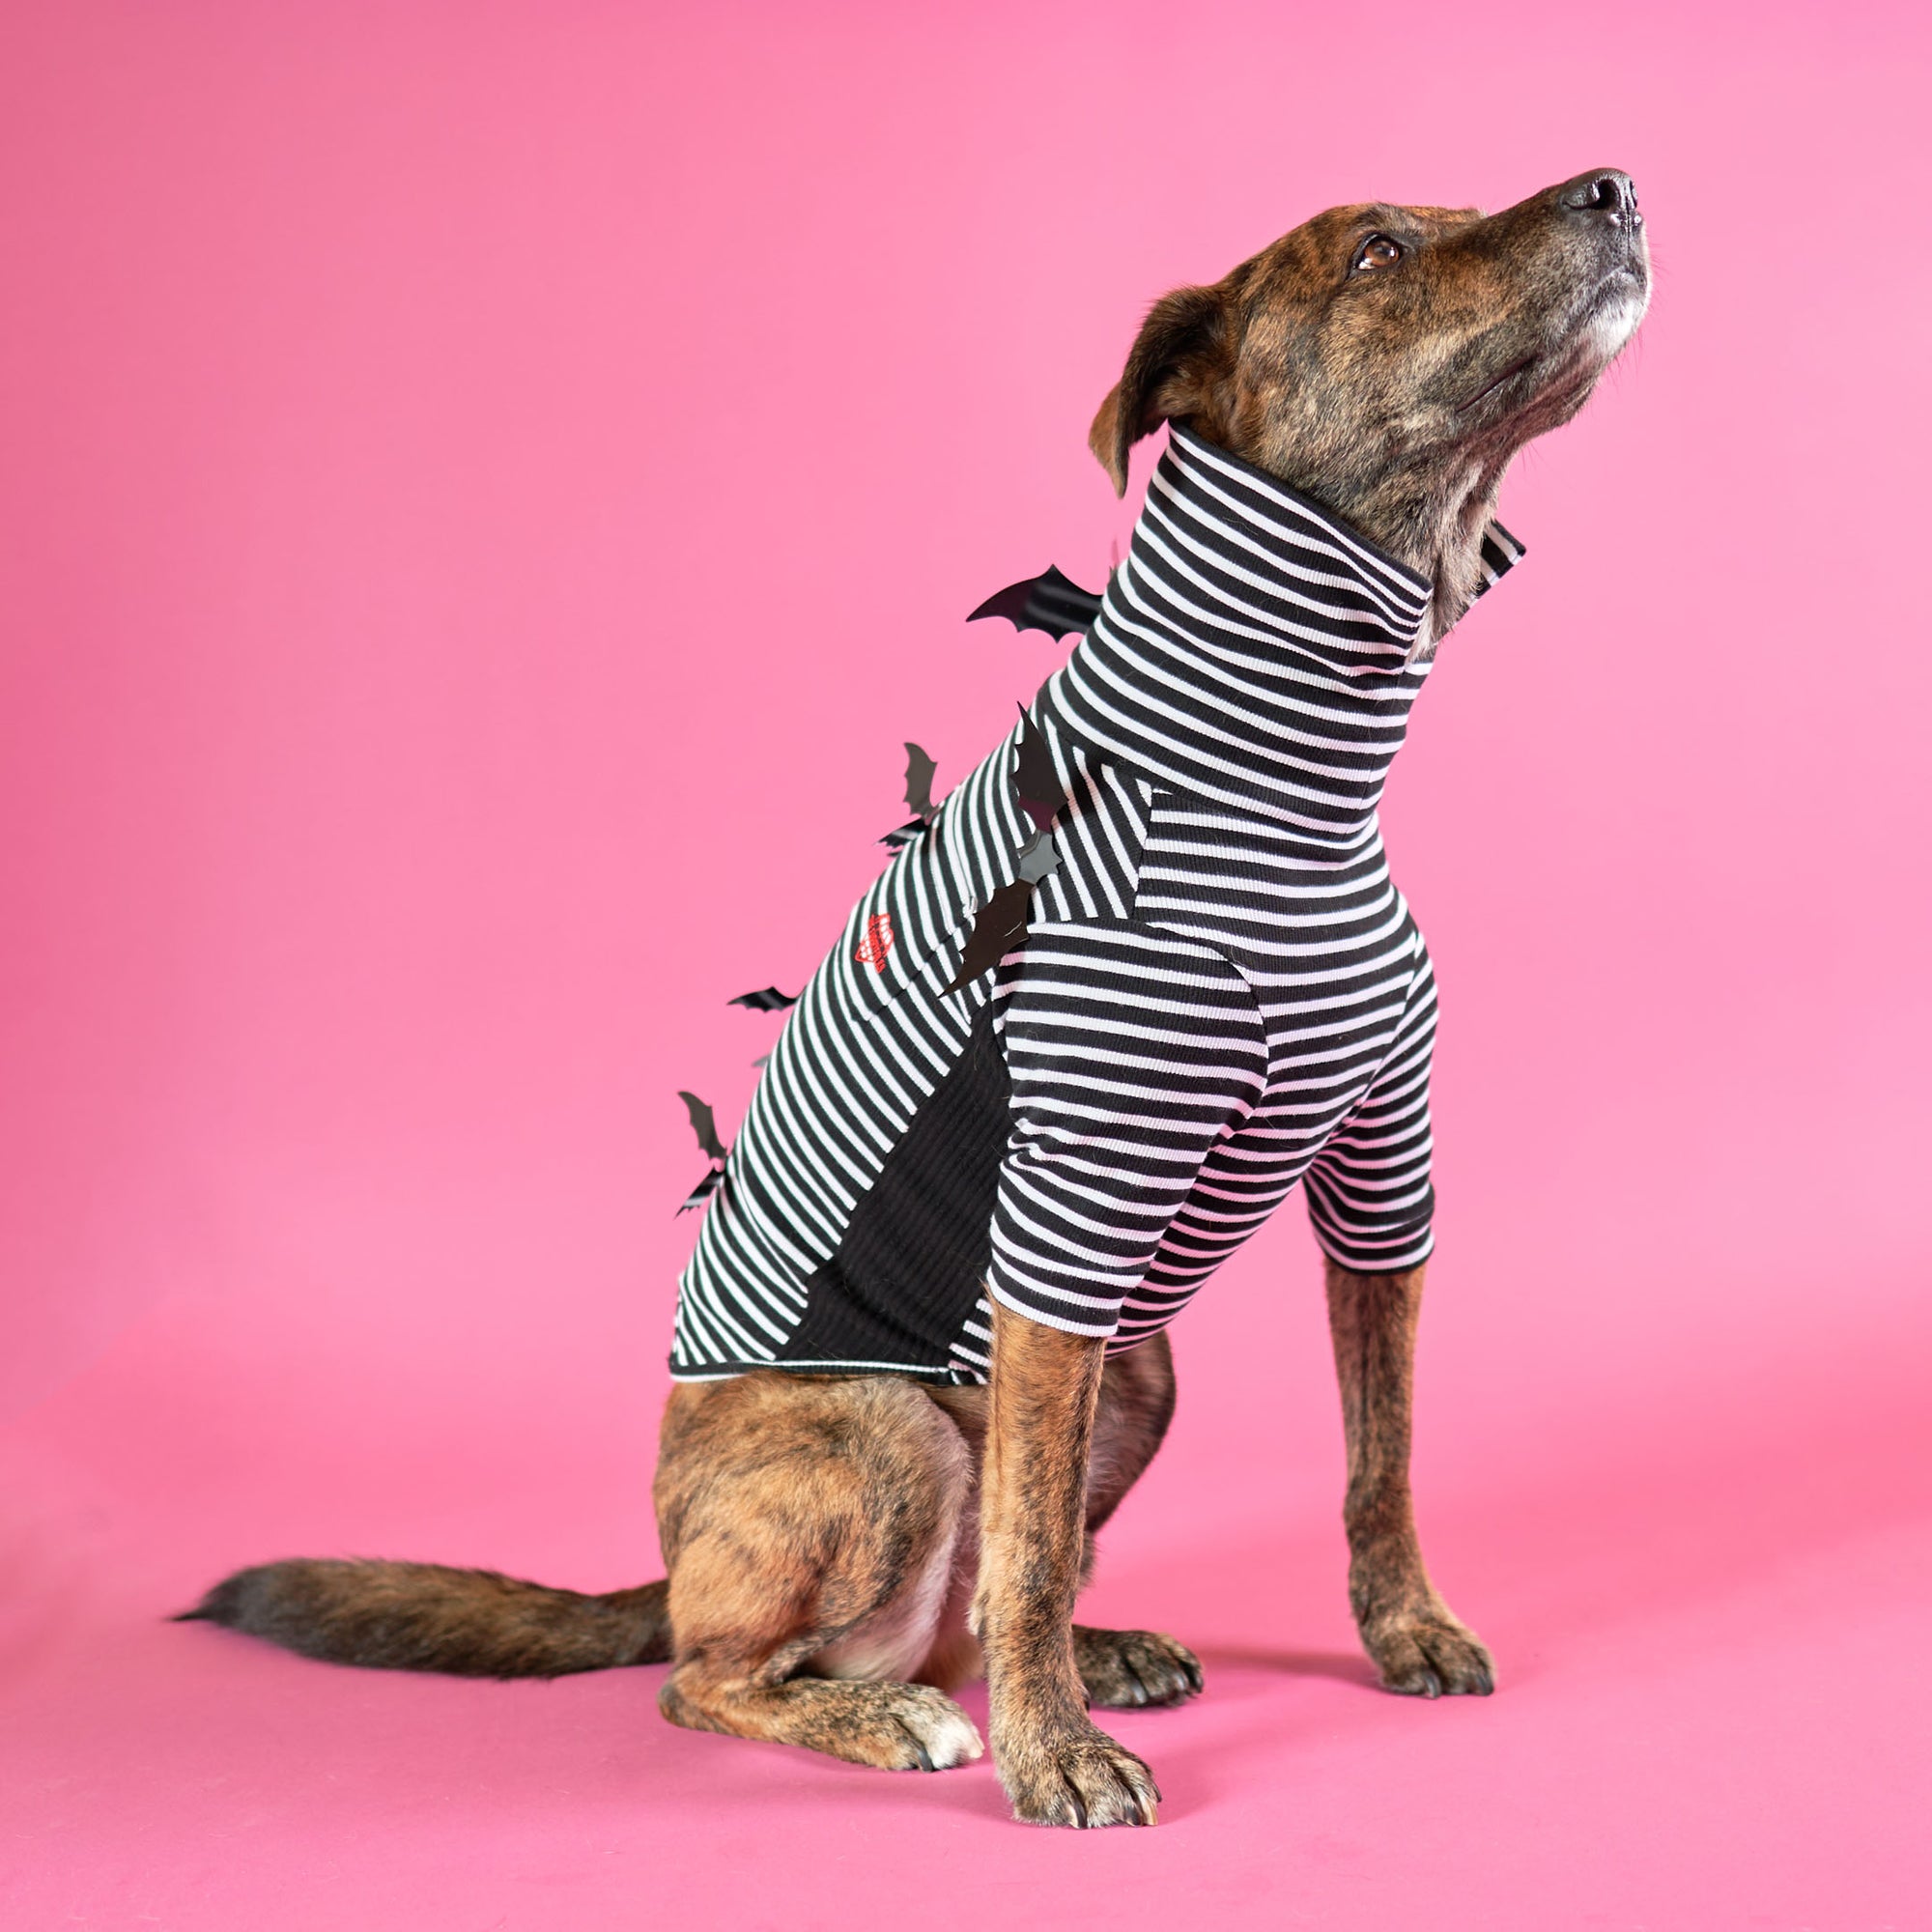 Brindle dog sitting attentively in a black & white stripe T-shirt on a pink background.